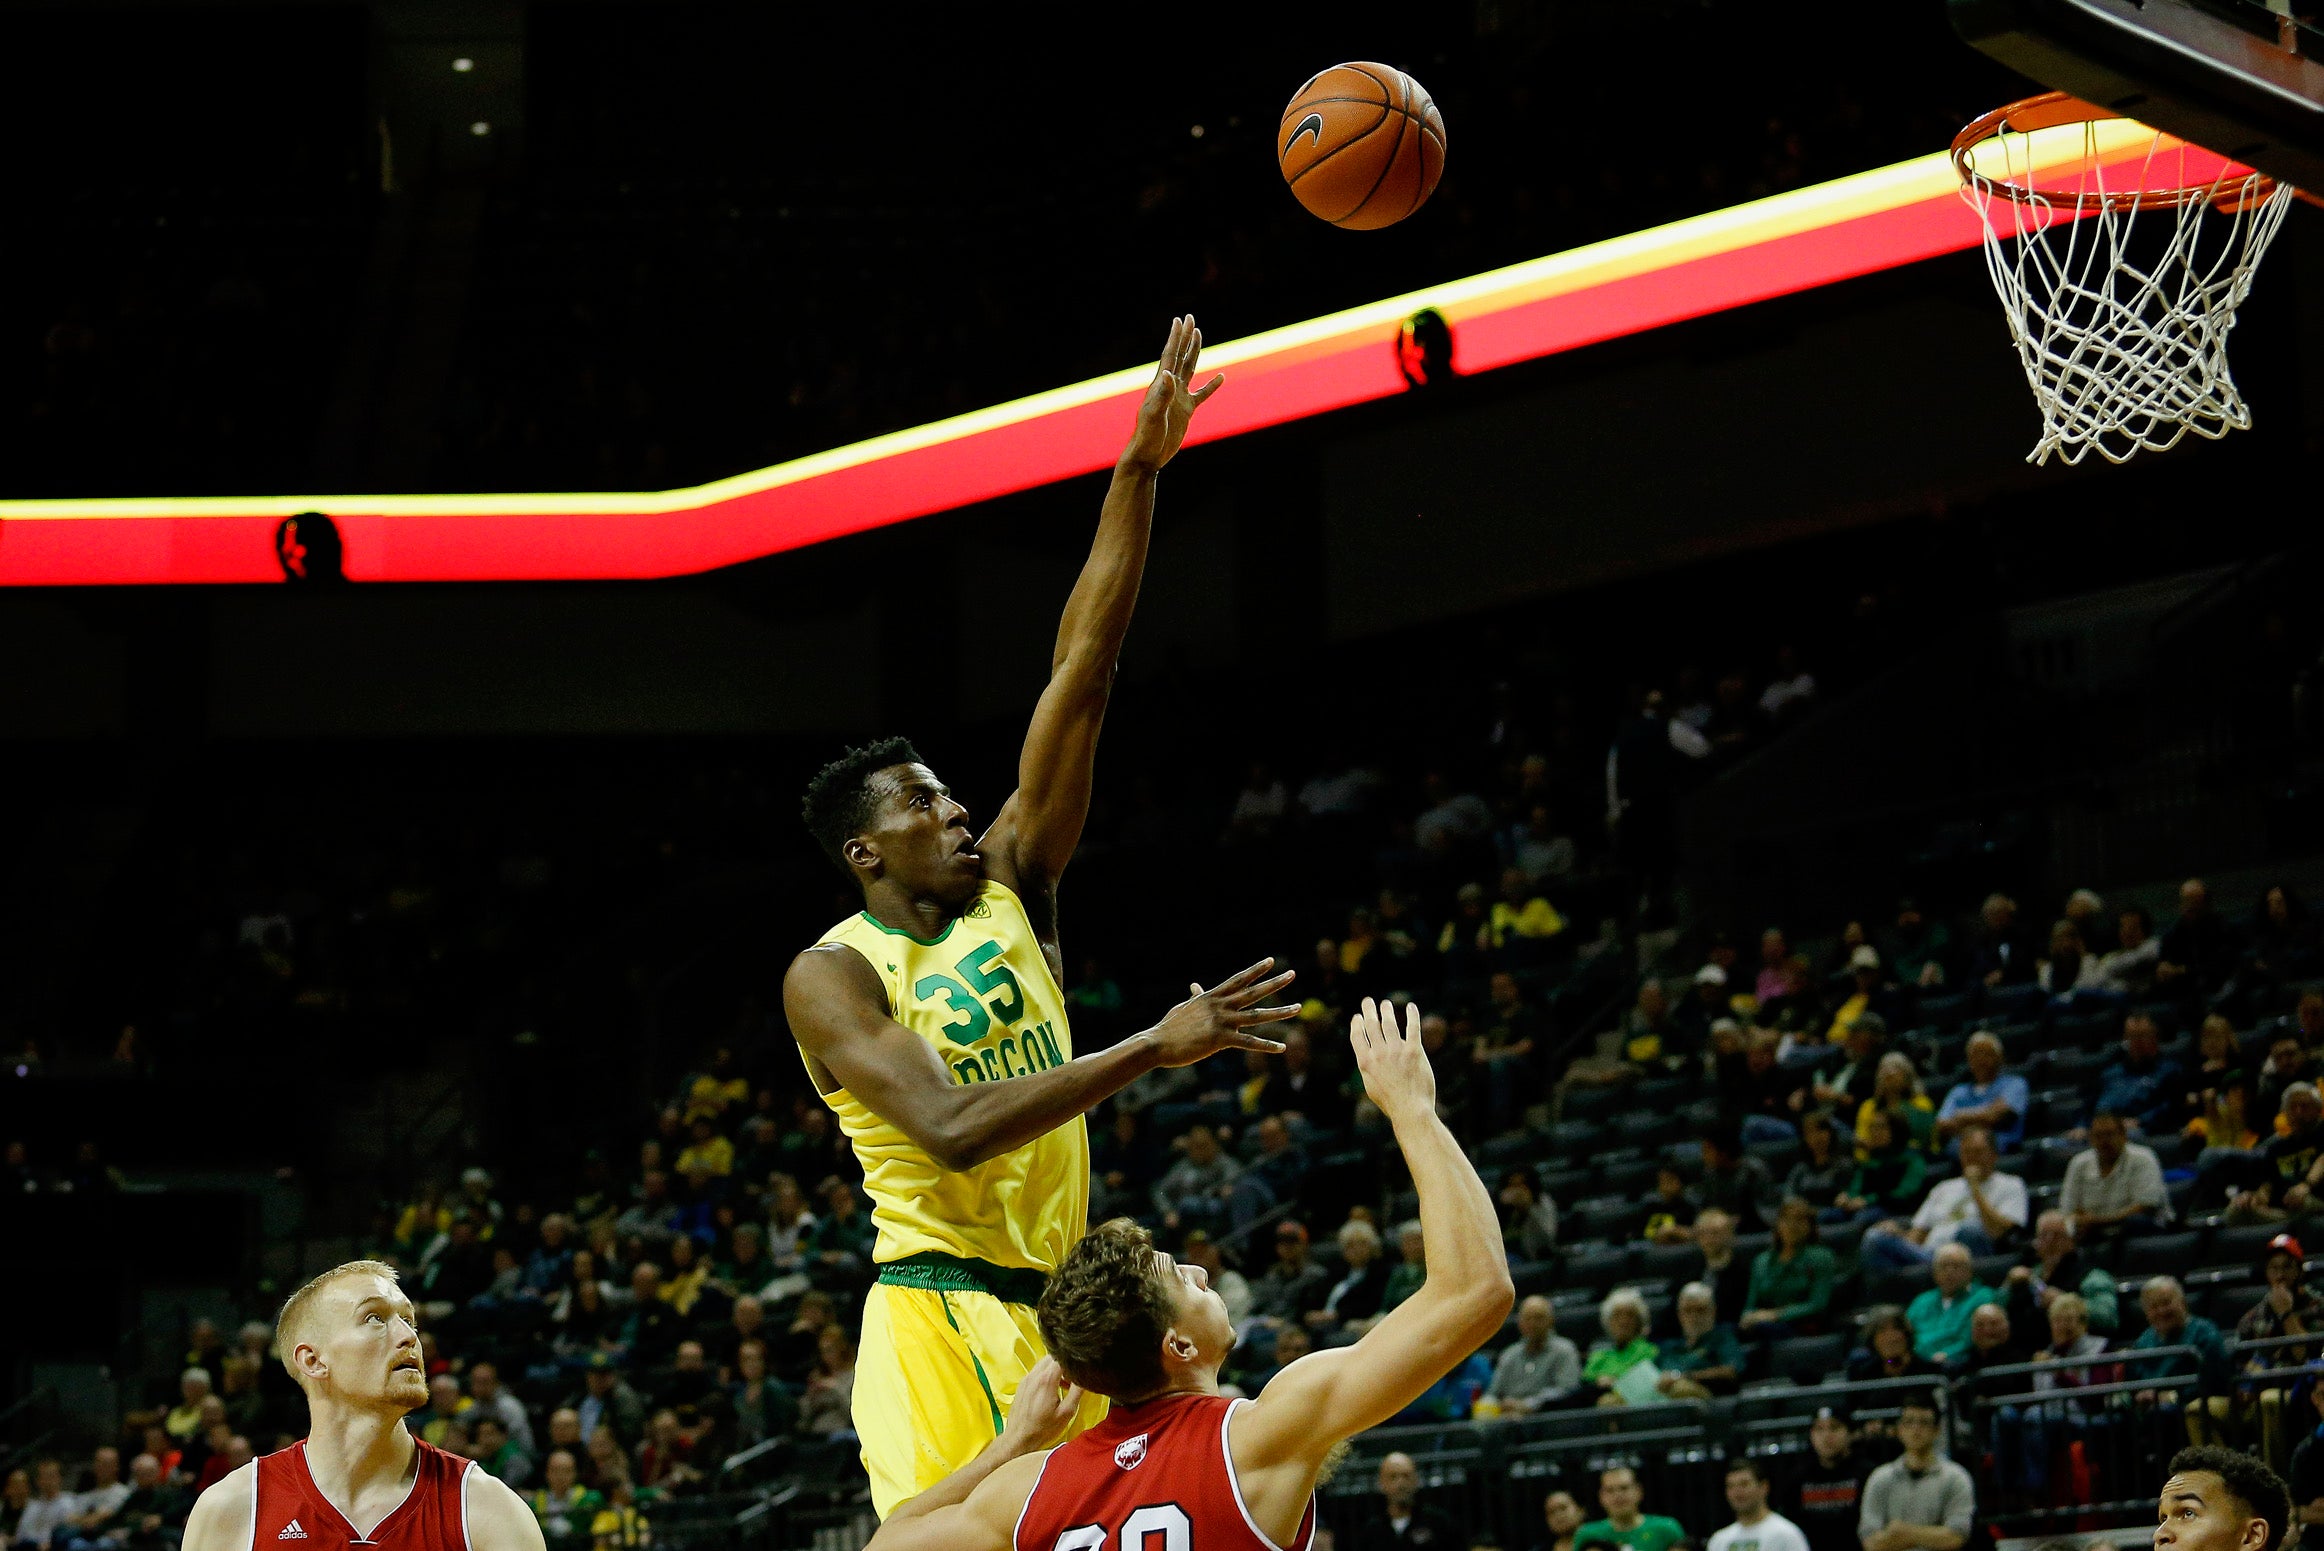 Kavell Bigby-Williams in action for Oregon University prior to March Madness